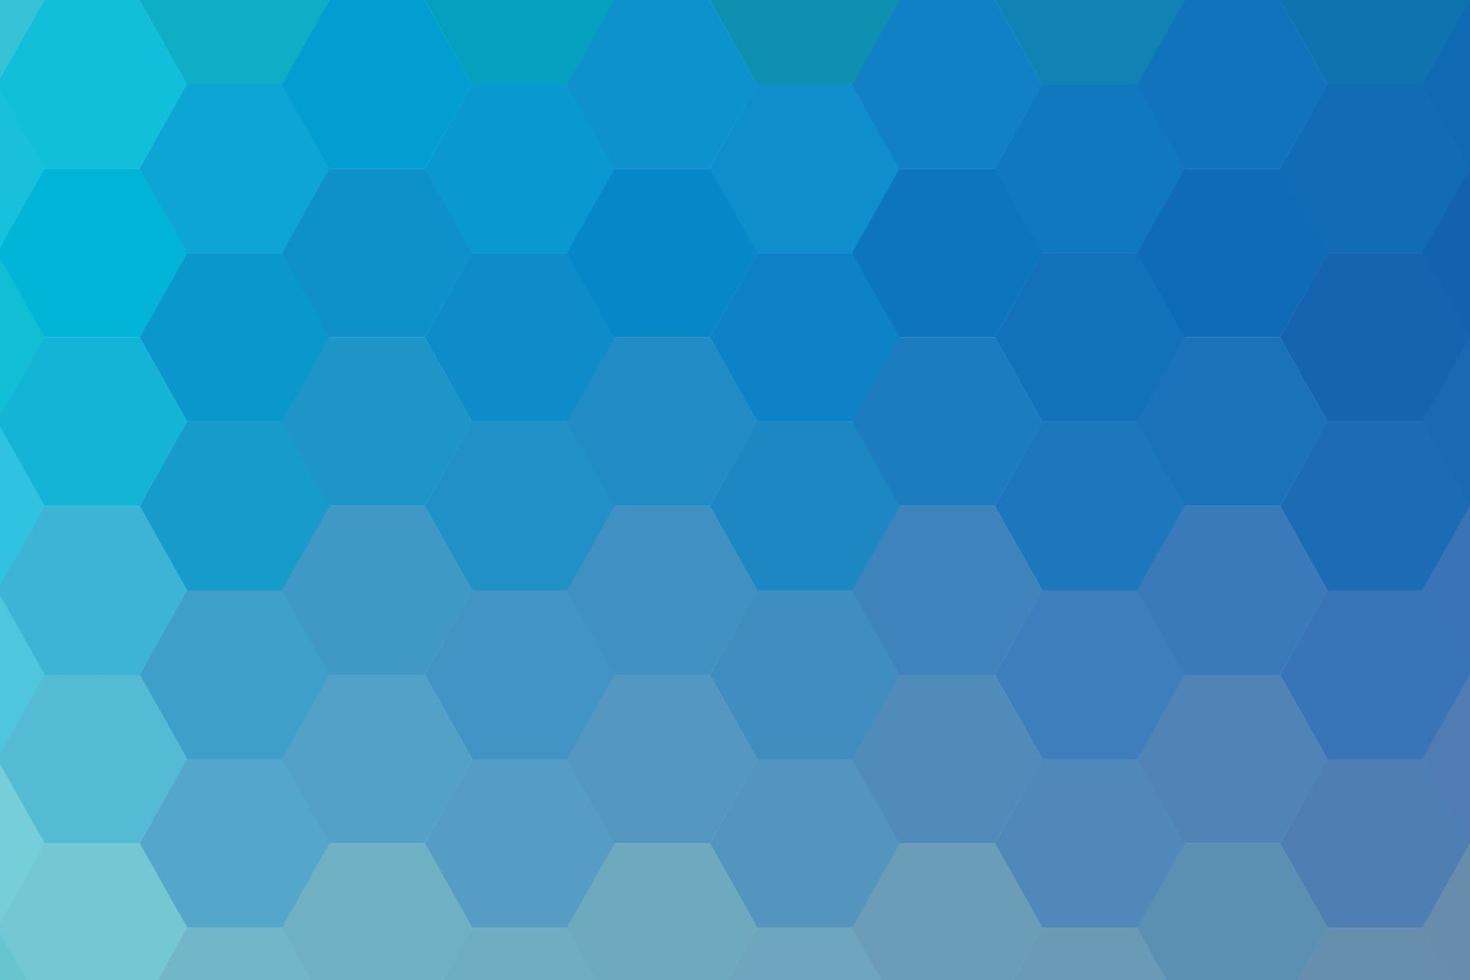 Background of blue colored hexagons, gradient background vector